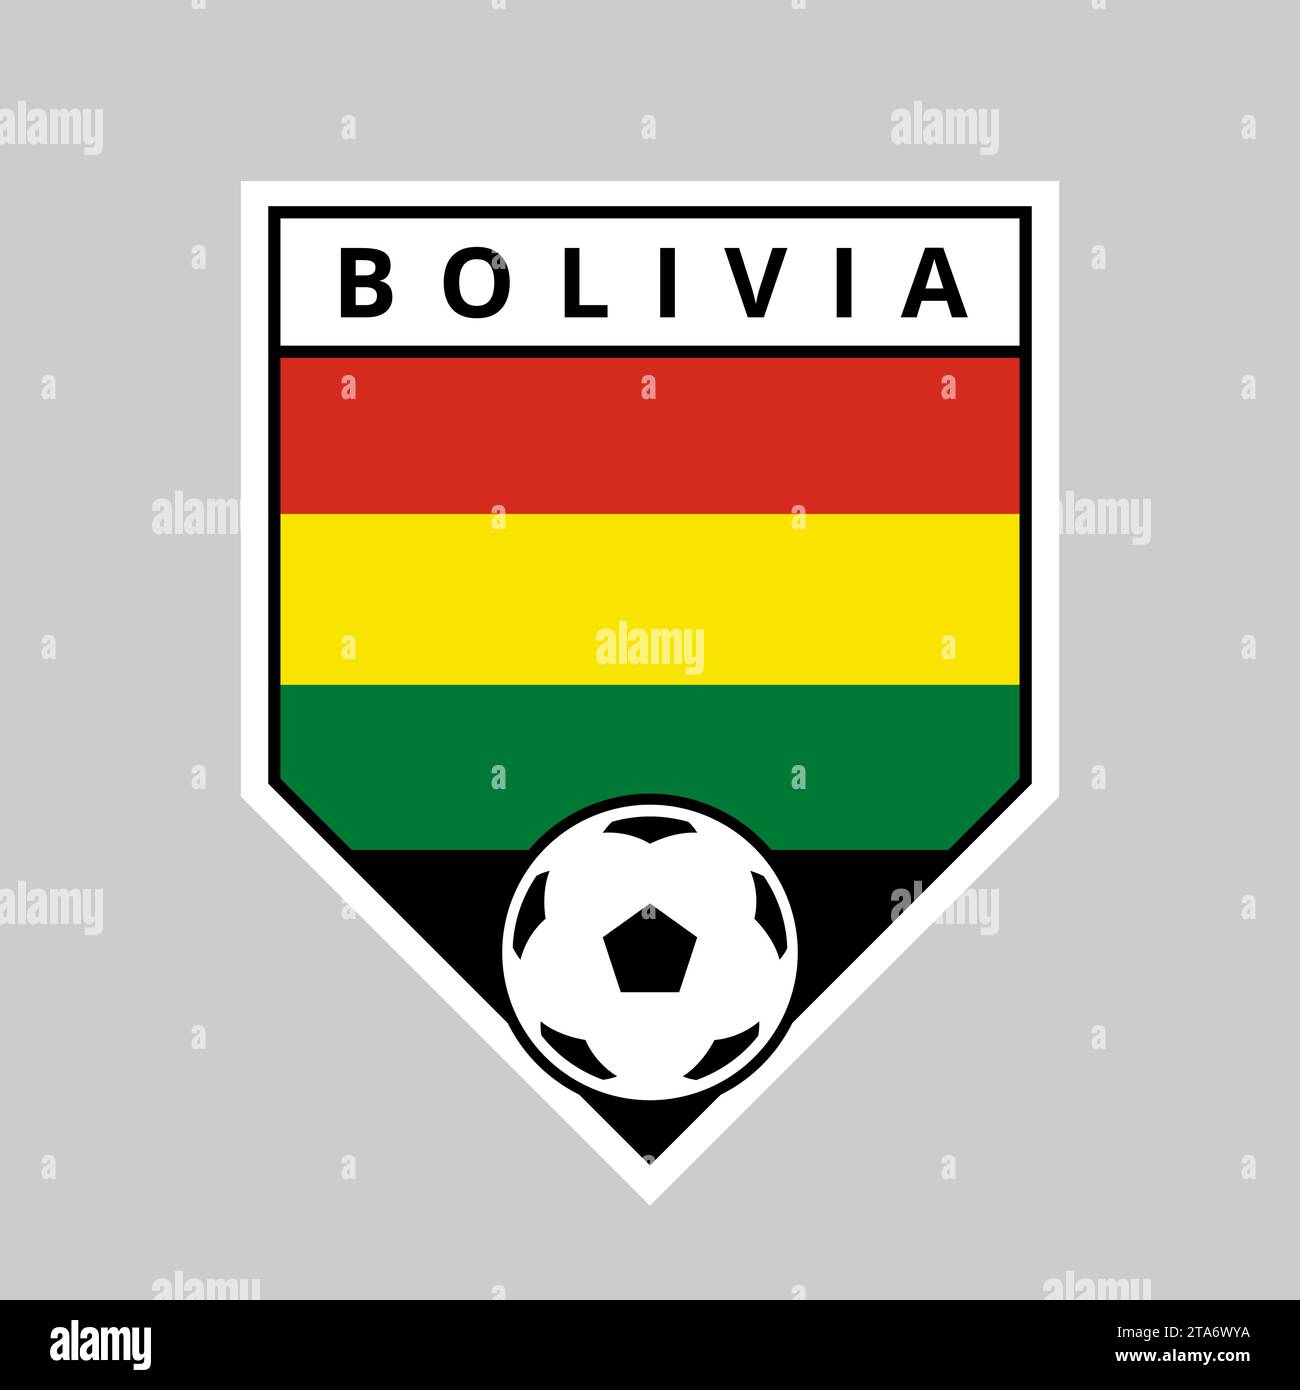 Illustration of Angled Shield Team Badge of Bolivia for Football Tournament Stock Vector